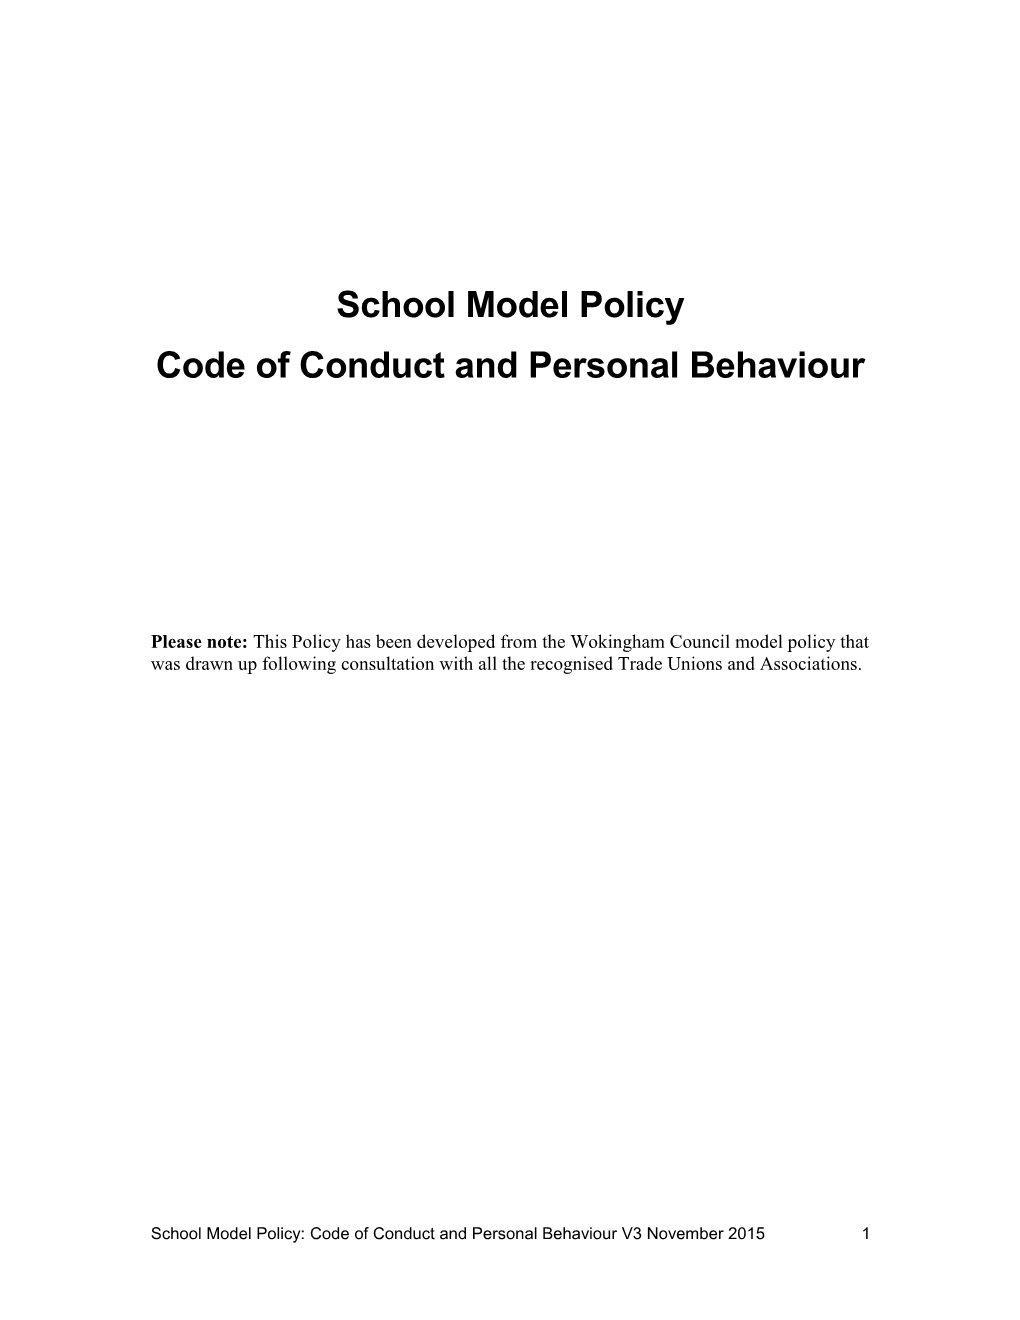 Code of Conduct and Personal Behaviour